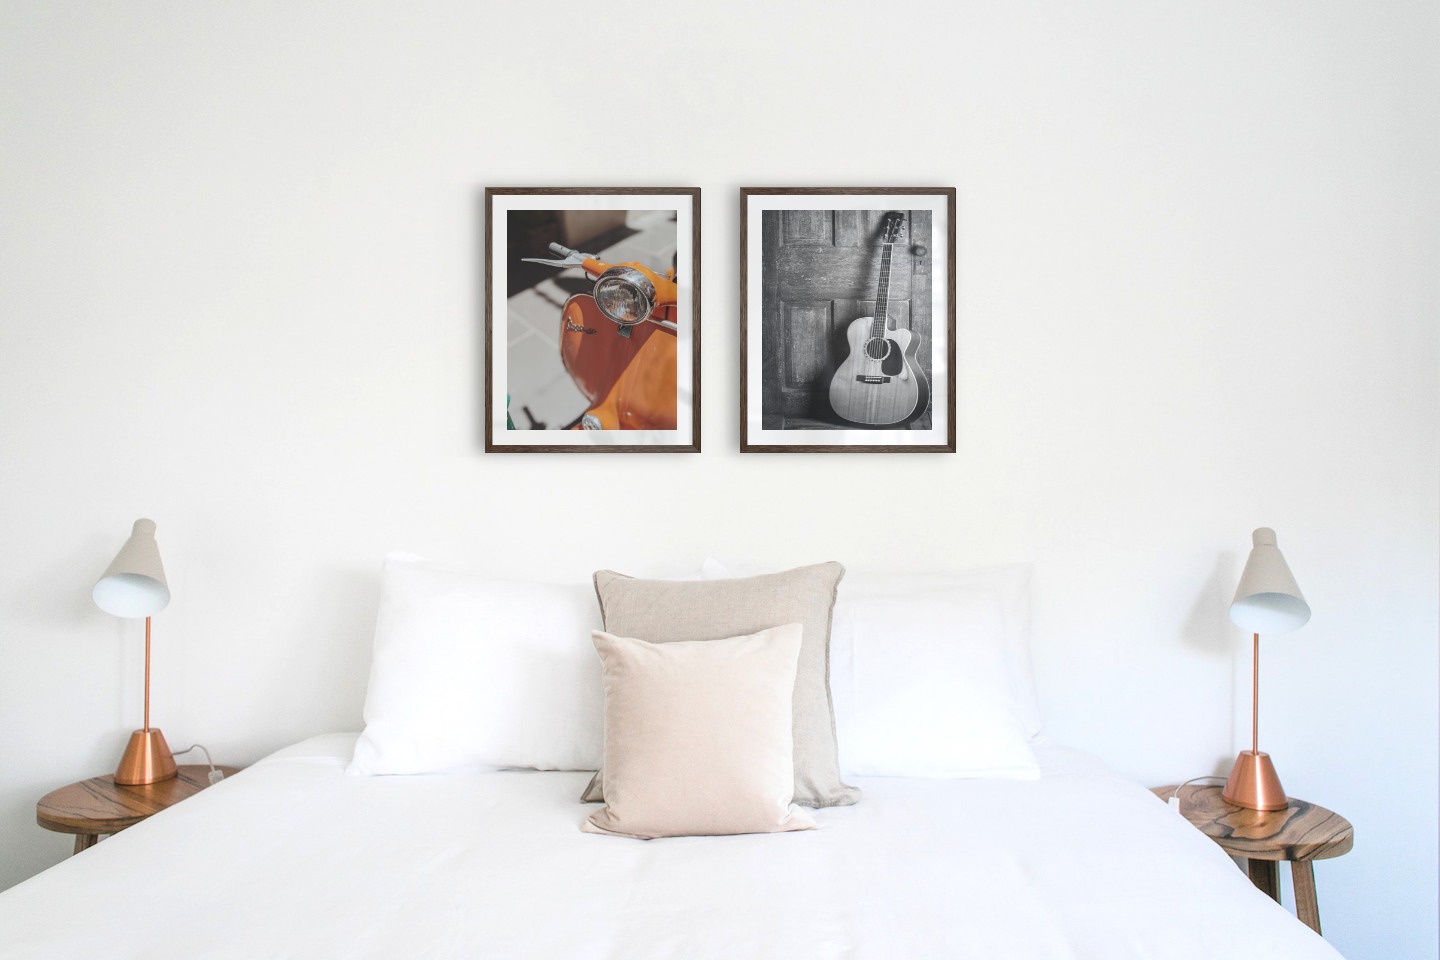 Gallery wall with picture frames in dark wood in sizes 40x50 with prints "Orange vespa" and "Guitar"